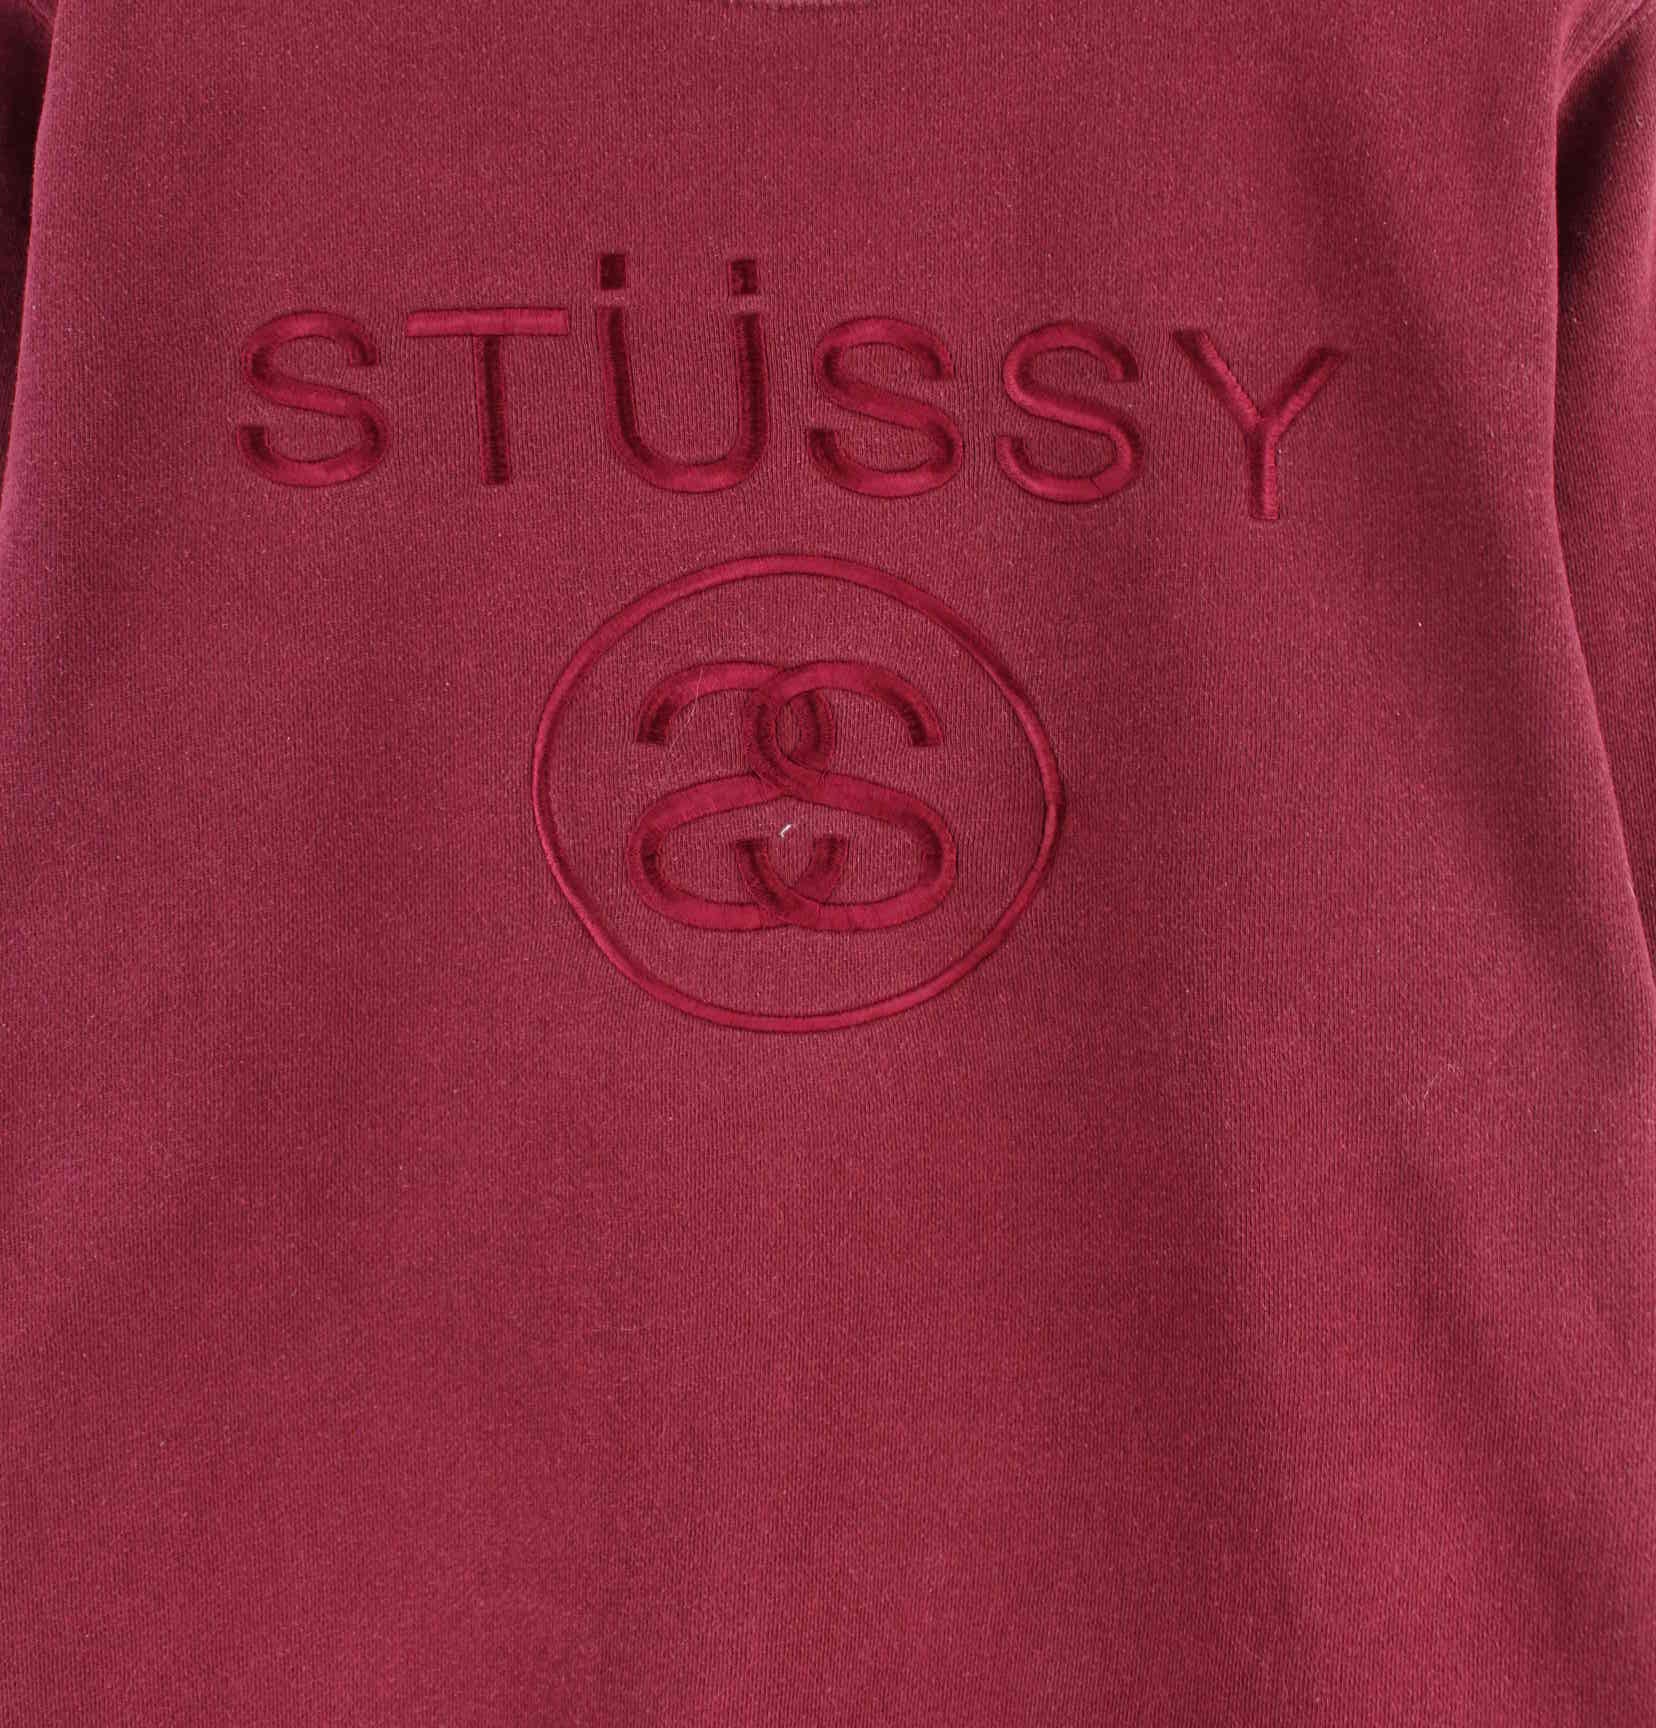 Stussy Embroidered Sweater Rot M (detail image 1)